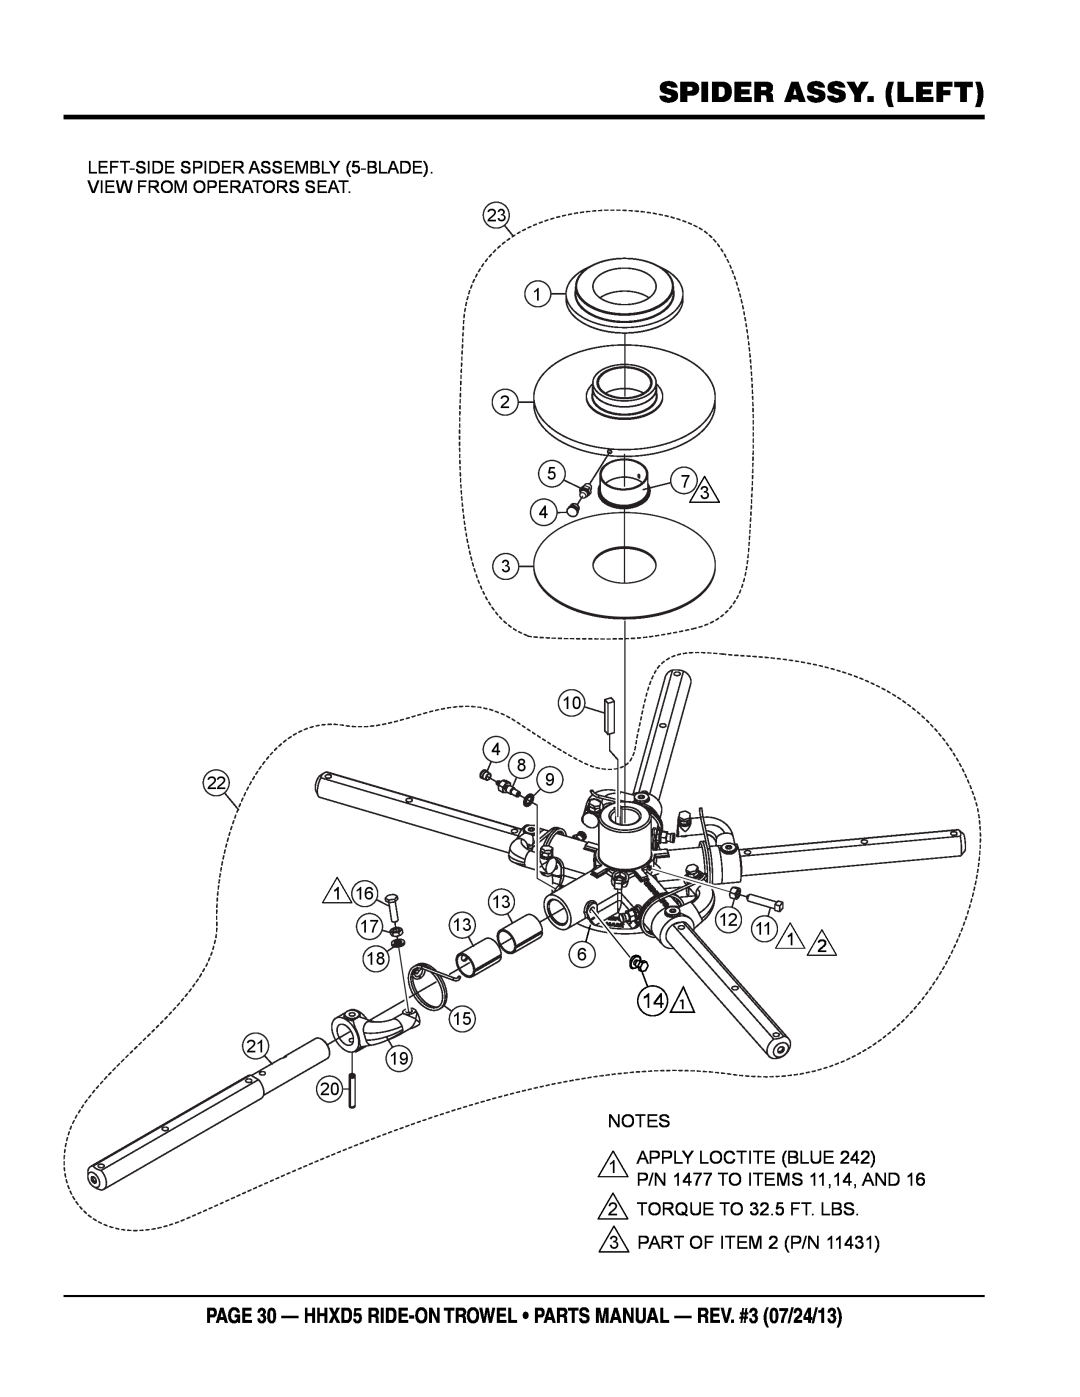 Multiquip HHSD5 spider assy. LEFT, page 30 - HHXD5 RIDE-ON TROWEL parts manual - rev. #3 07/24/13, 5 7 3 